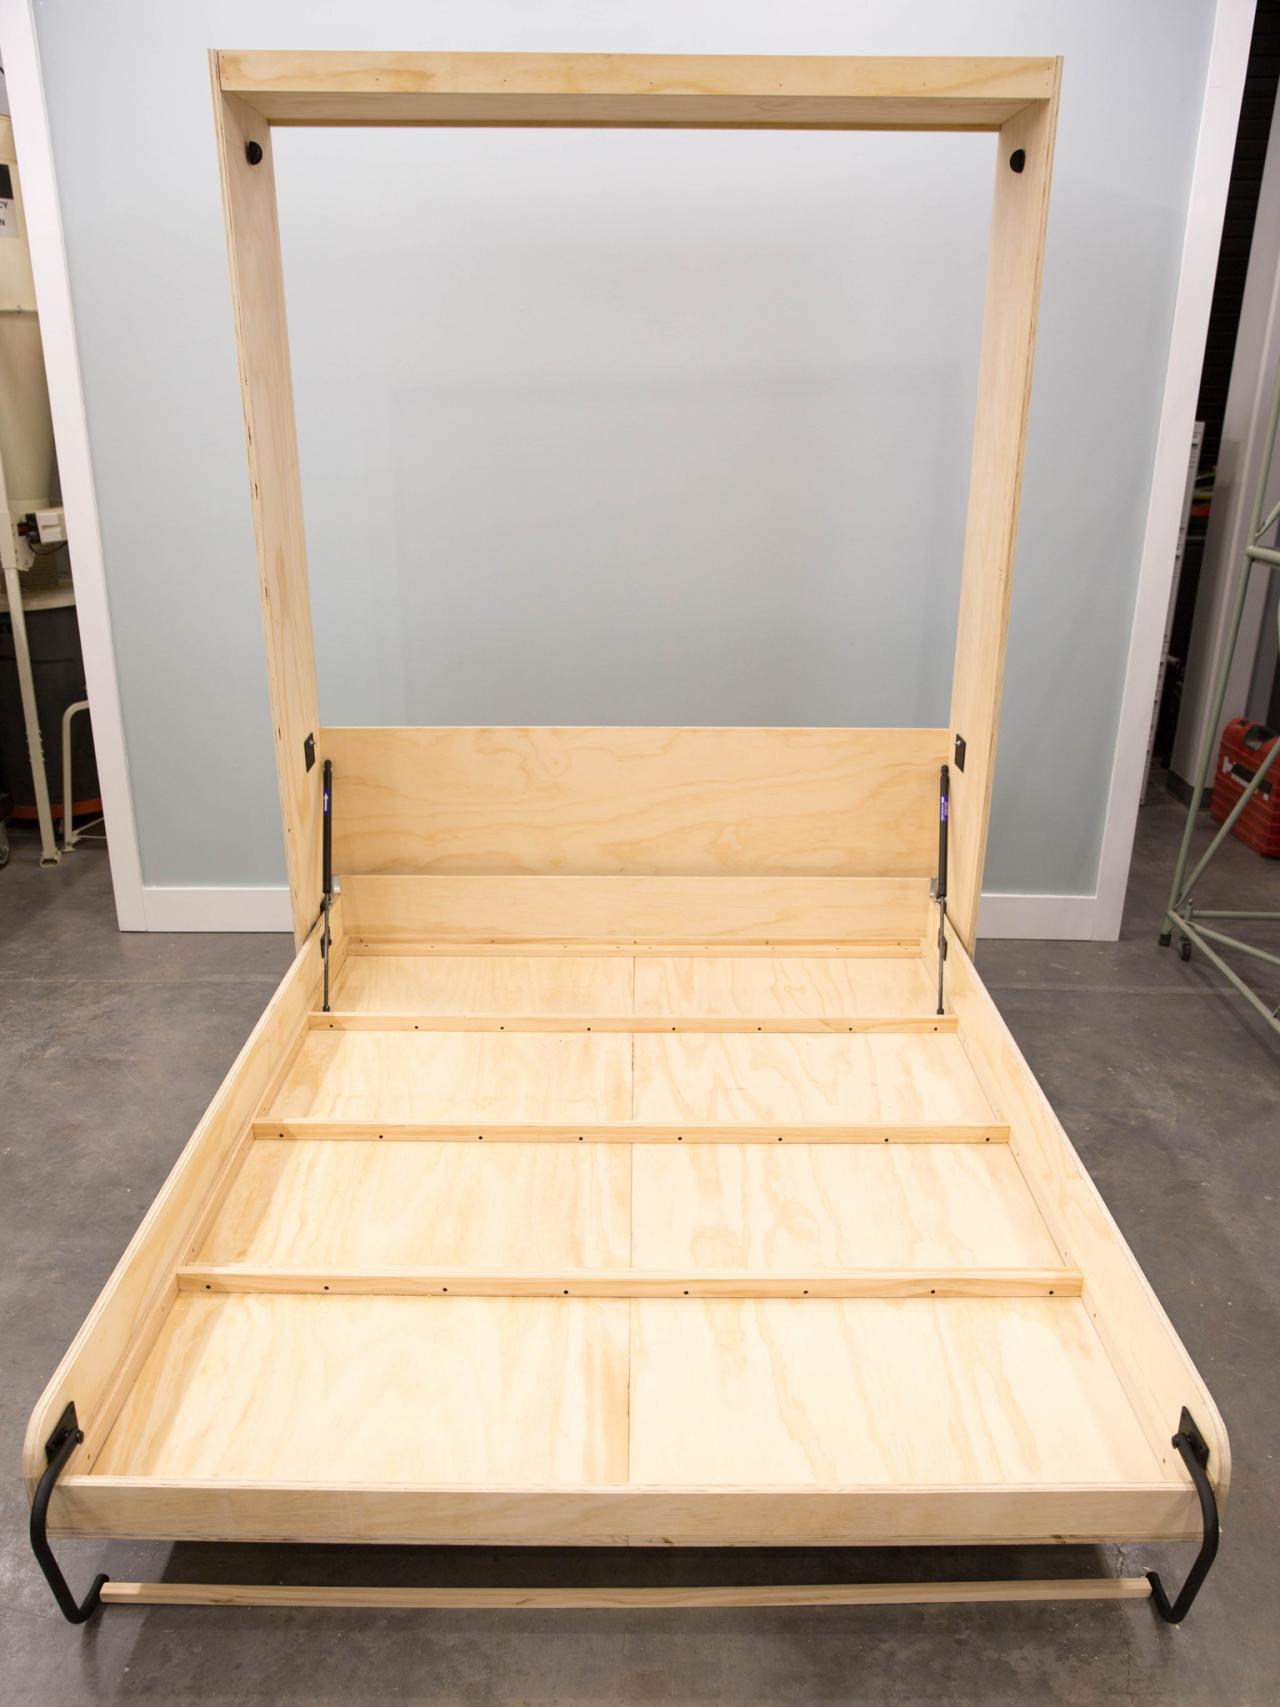 How To Build A Murphy Bed, Diy Portable Bed Frame